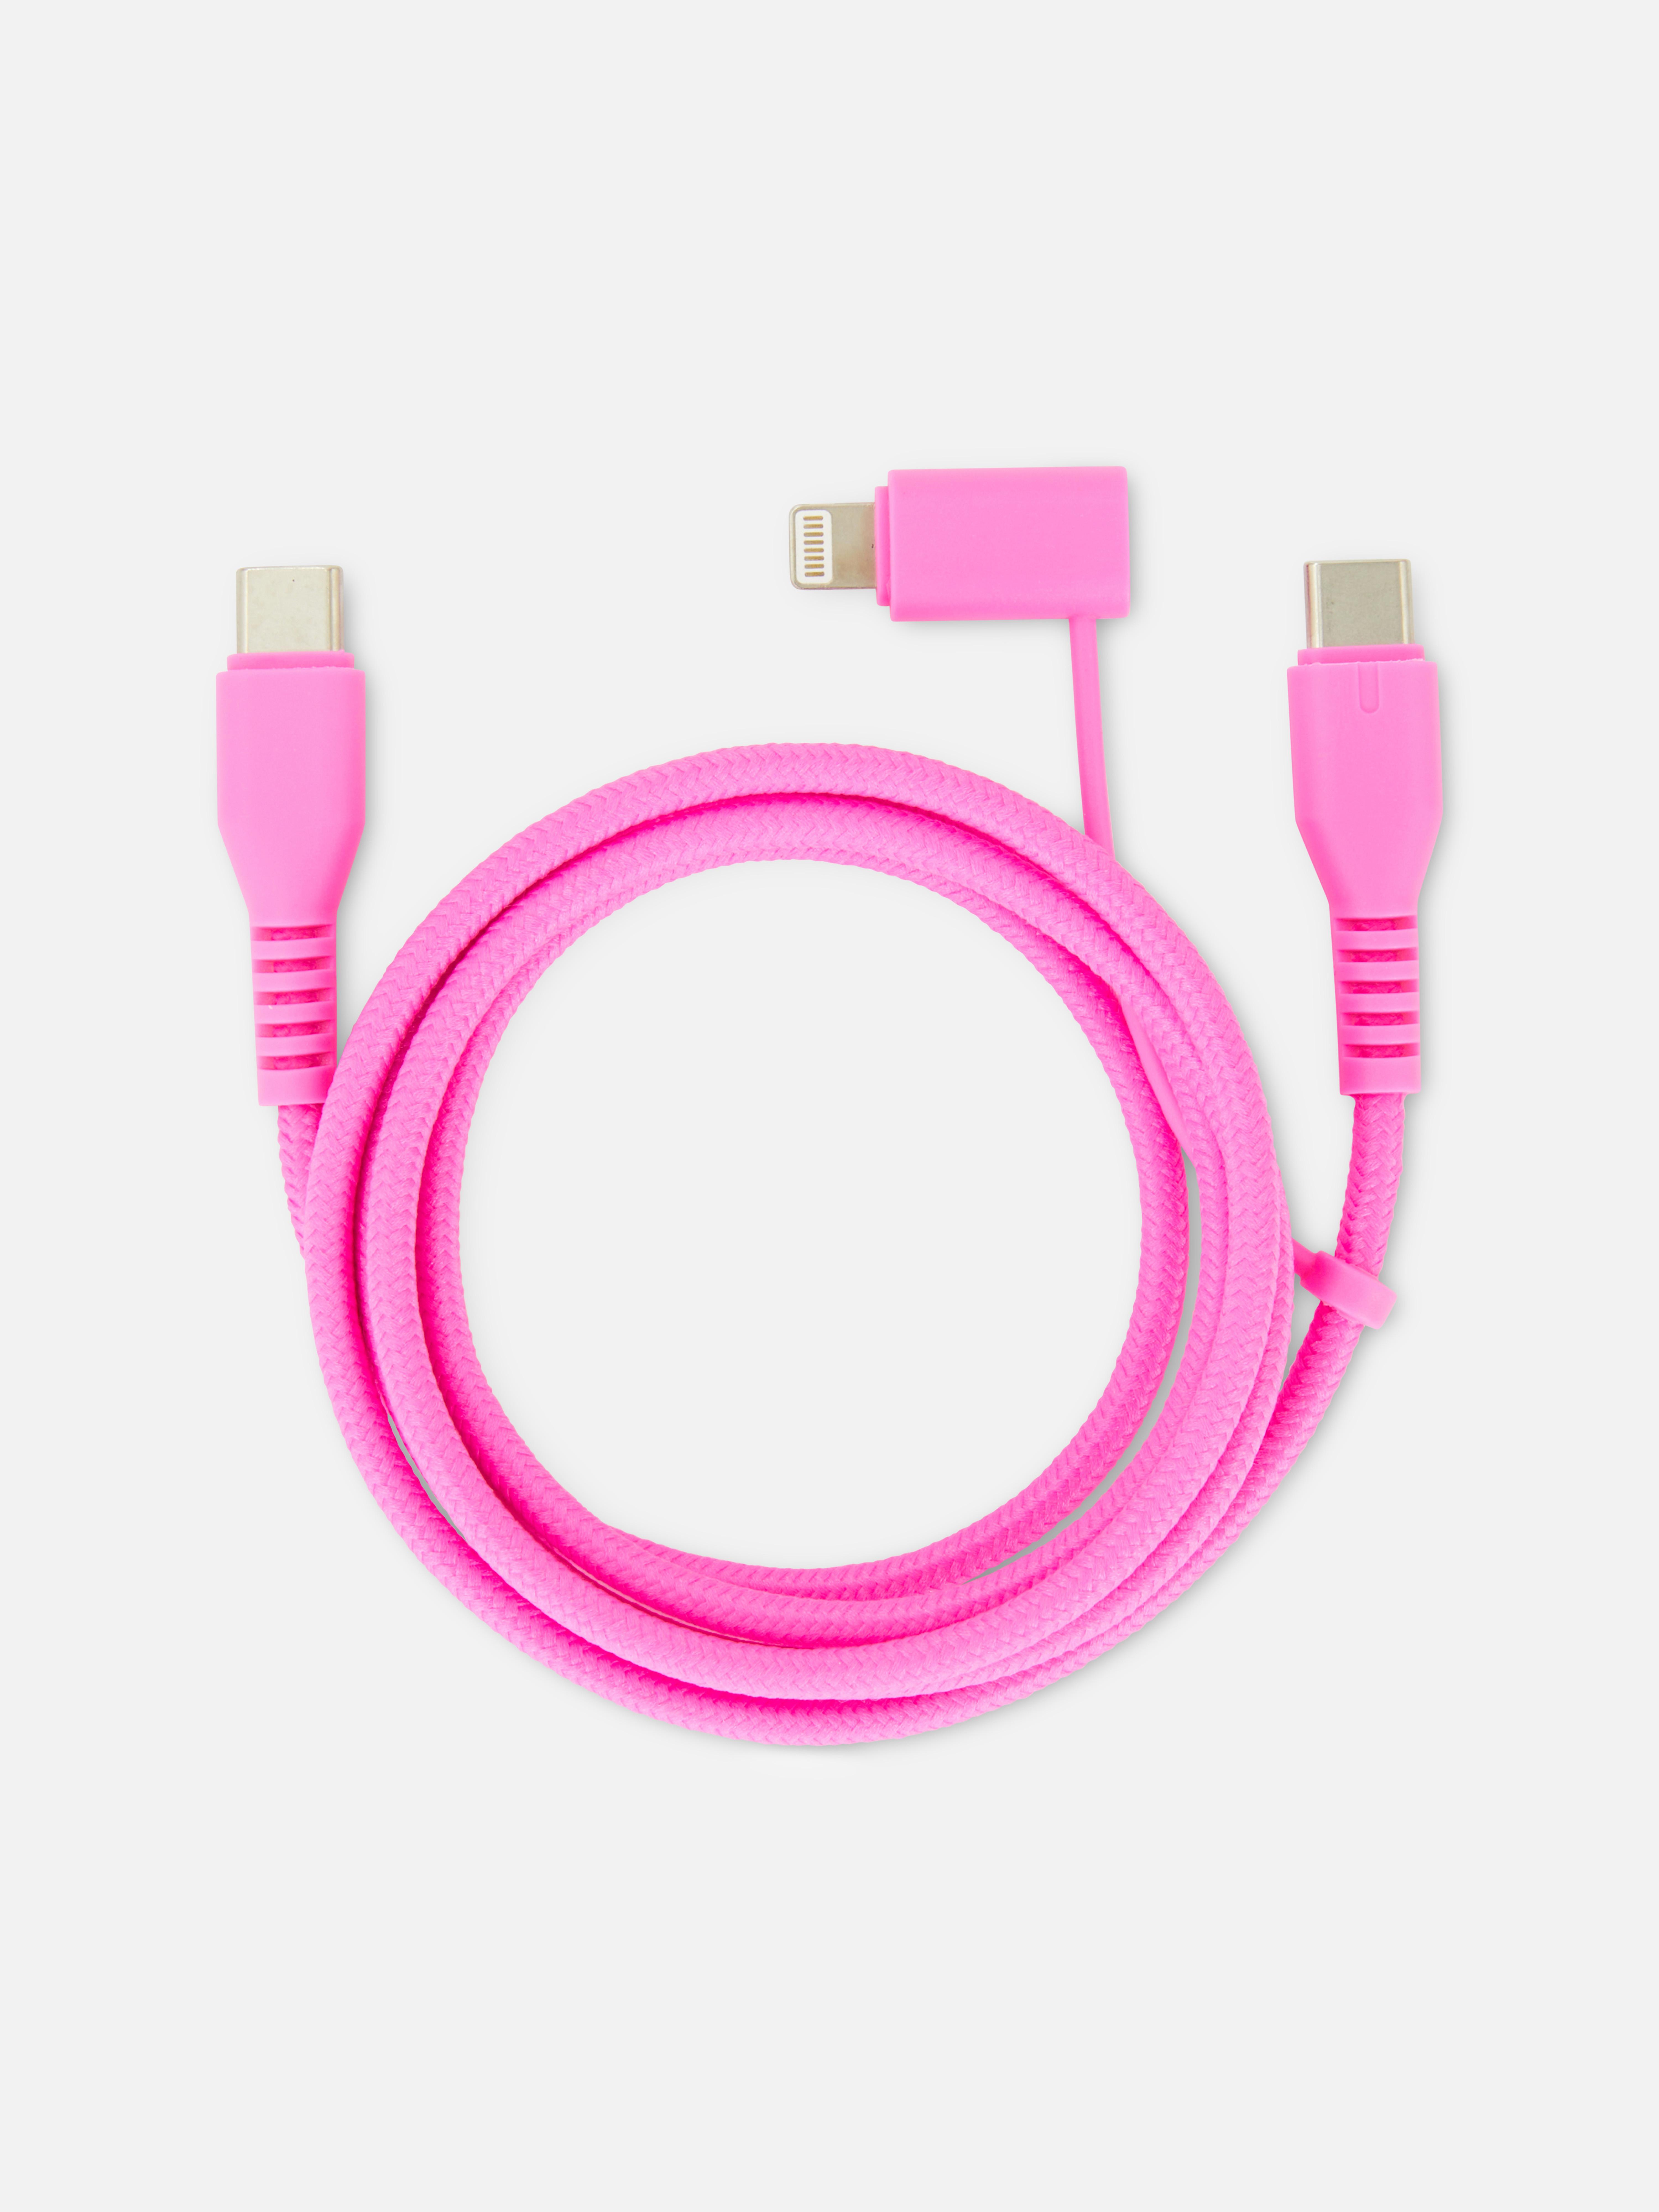 1m USB and USB-C Cable